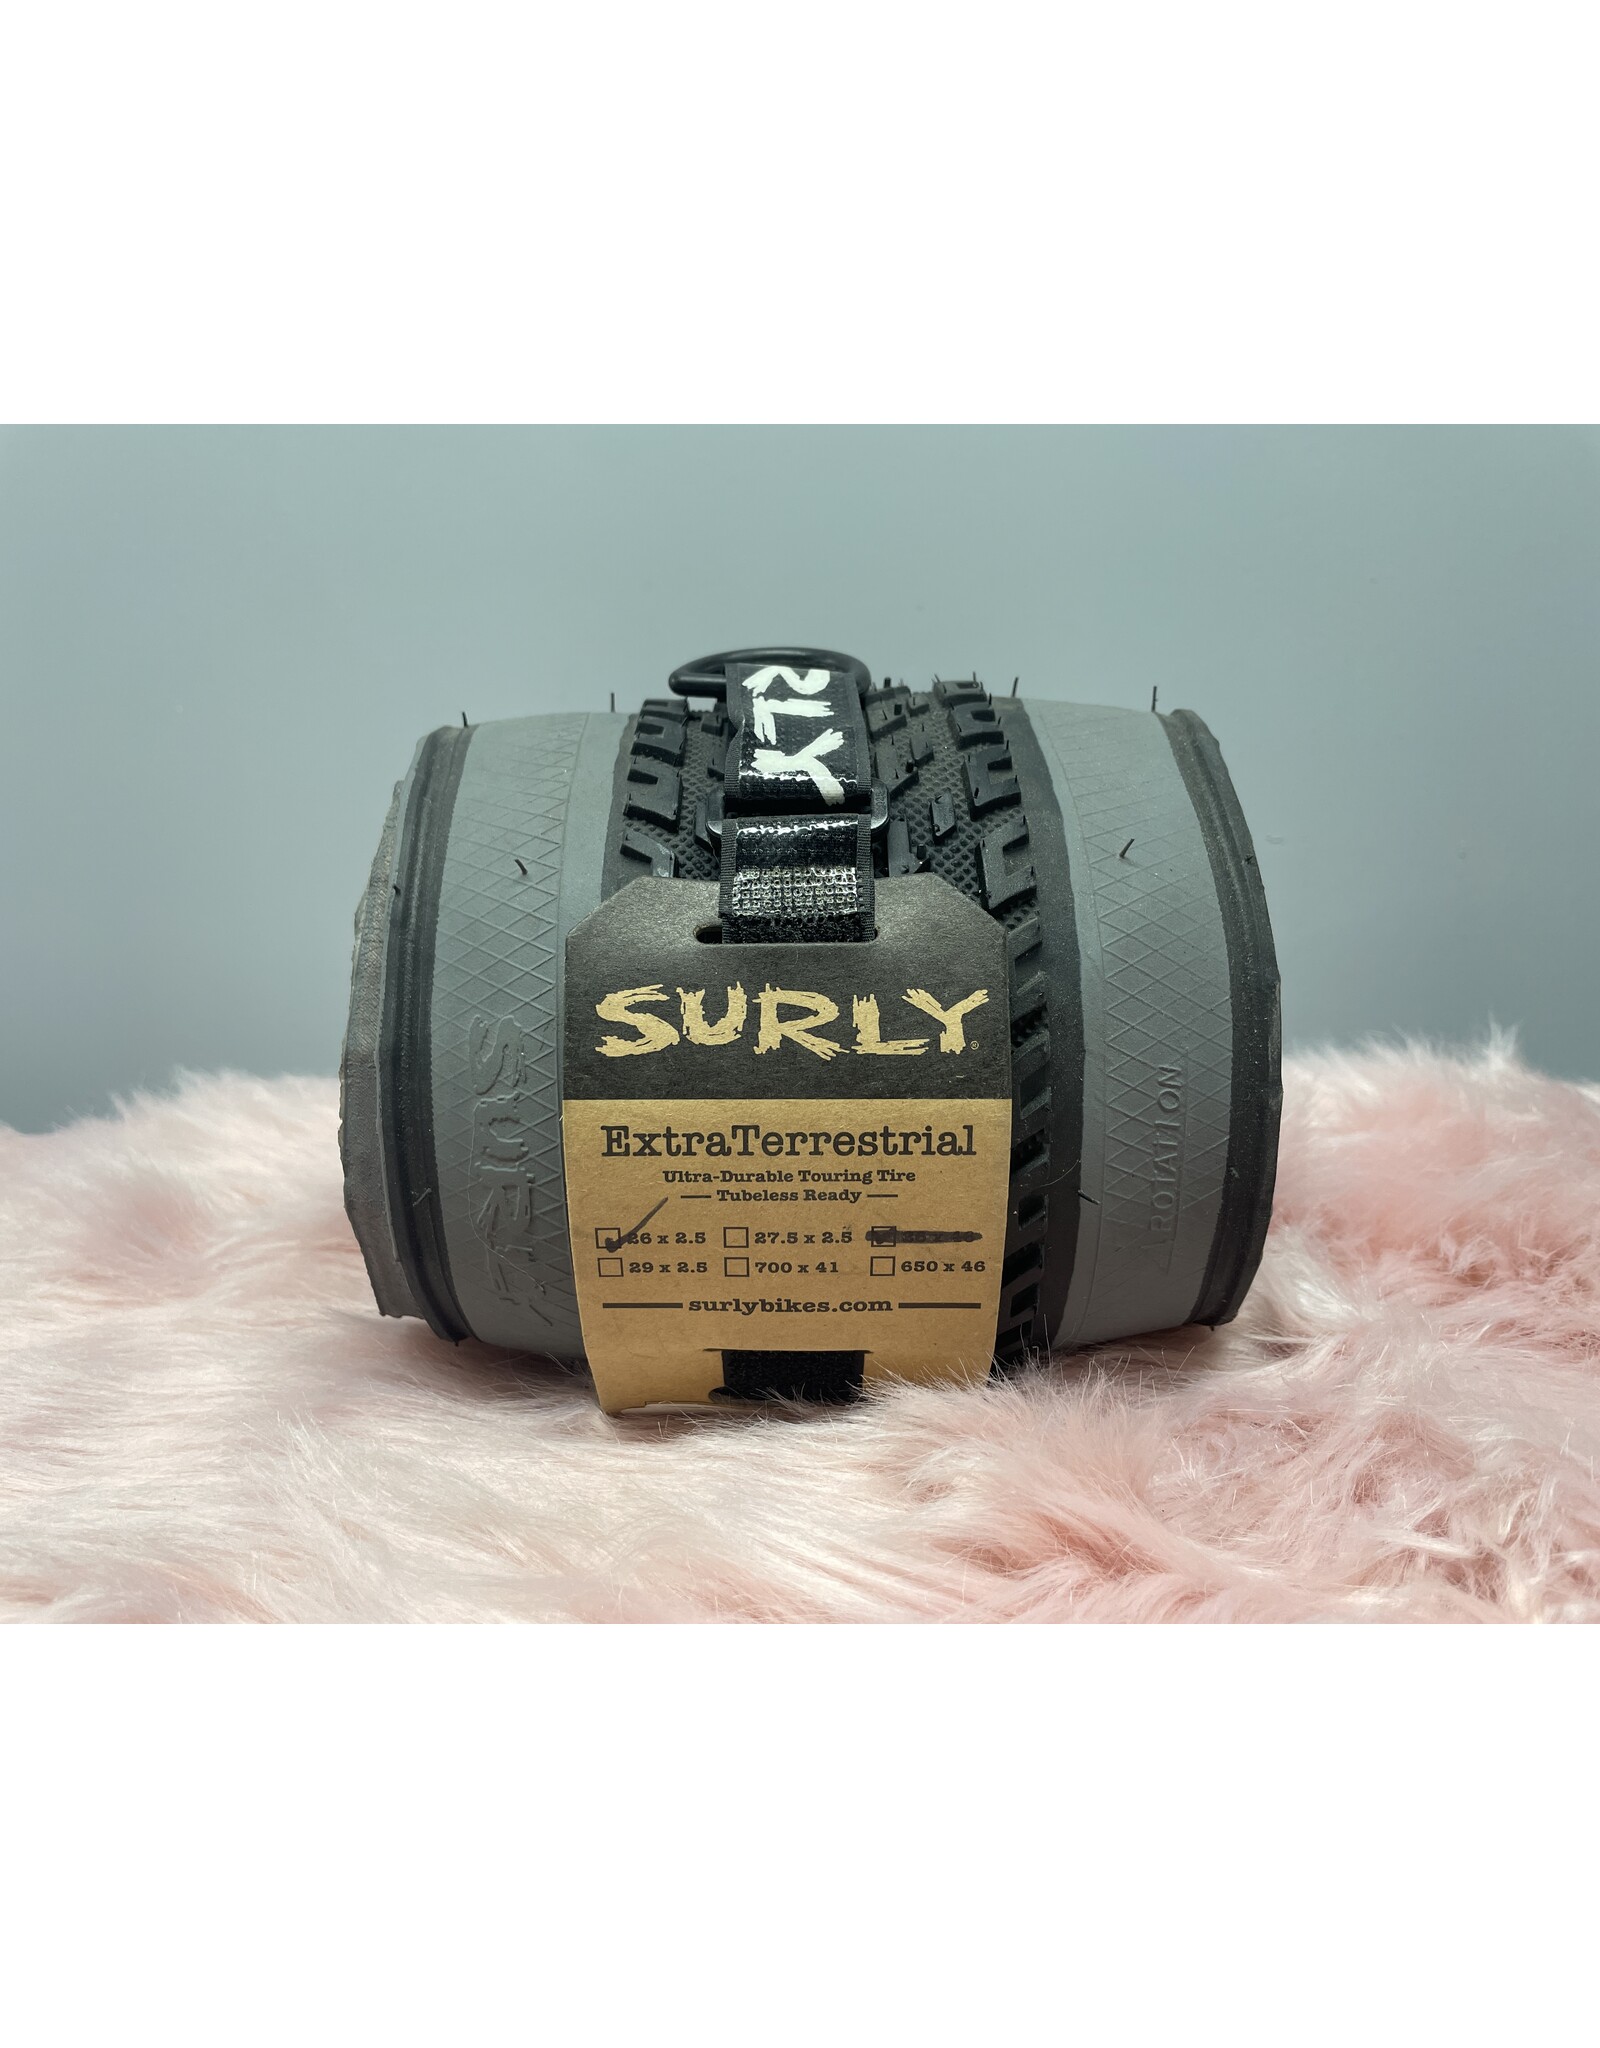 Surly Surly ExtraTerrestrial Tire - Tubeless, Folding, 60tpi Slate Sidewall 26 x 2.5